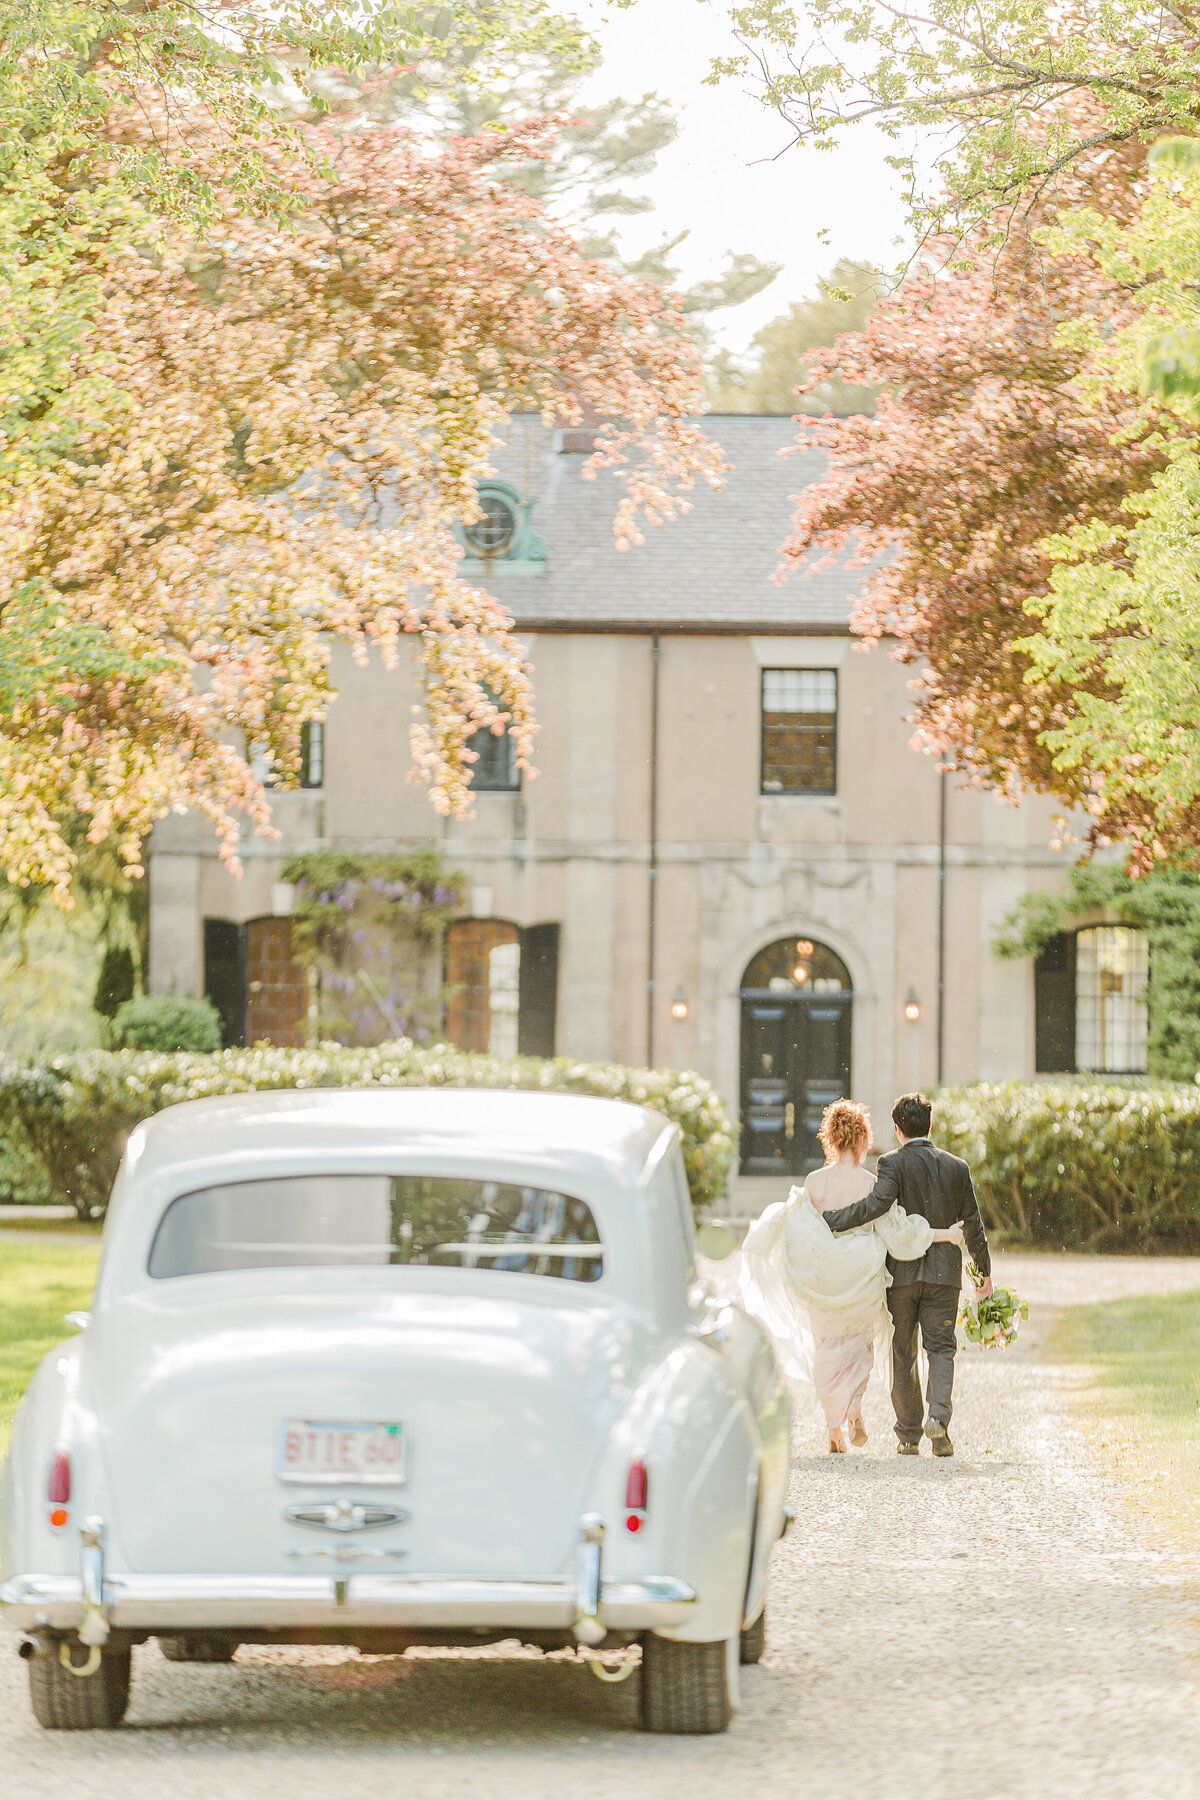 Bride and groom walk with their arms wrapped around each other towards a French chateau. A vintage Rolls Royce is in the foreground. Captured by best destination wedding and elopement photographer Lia Rose Weddings.